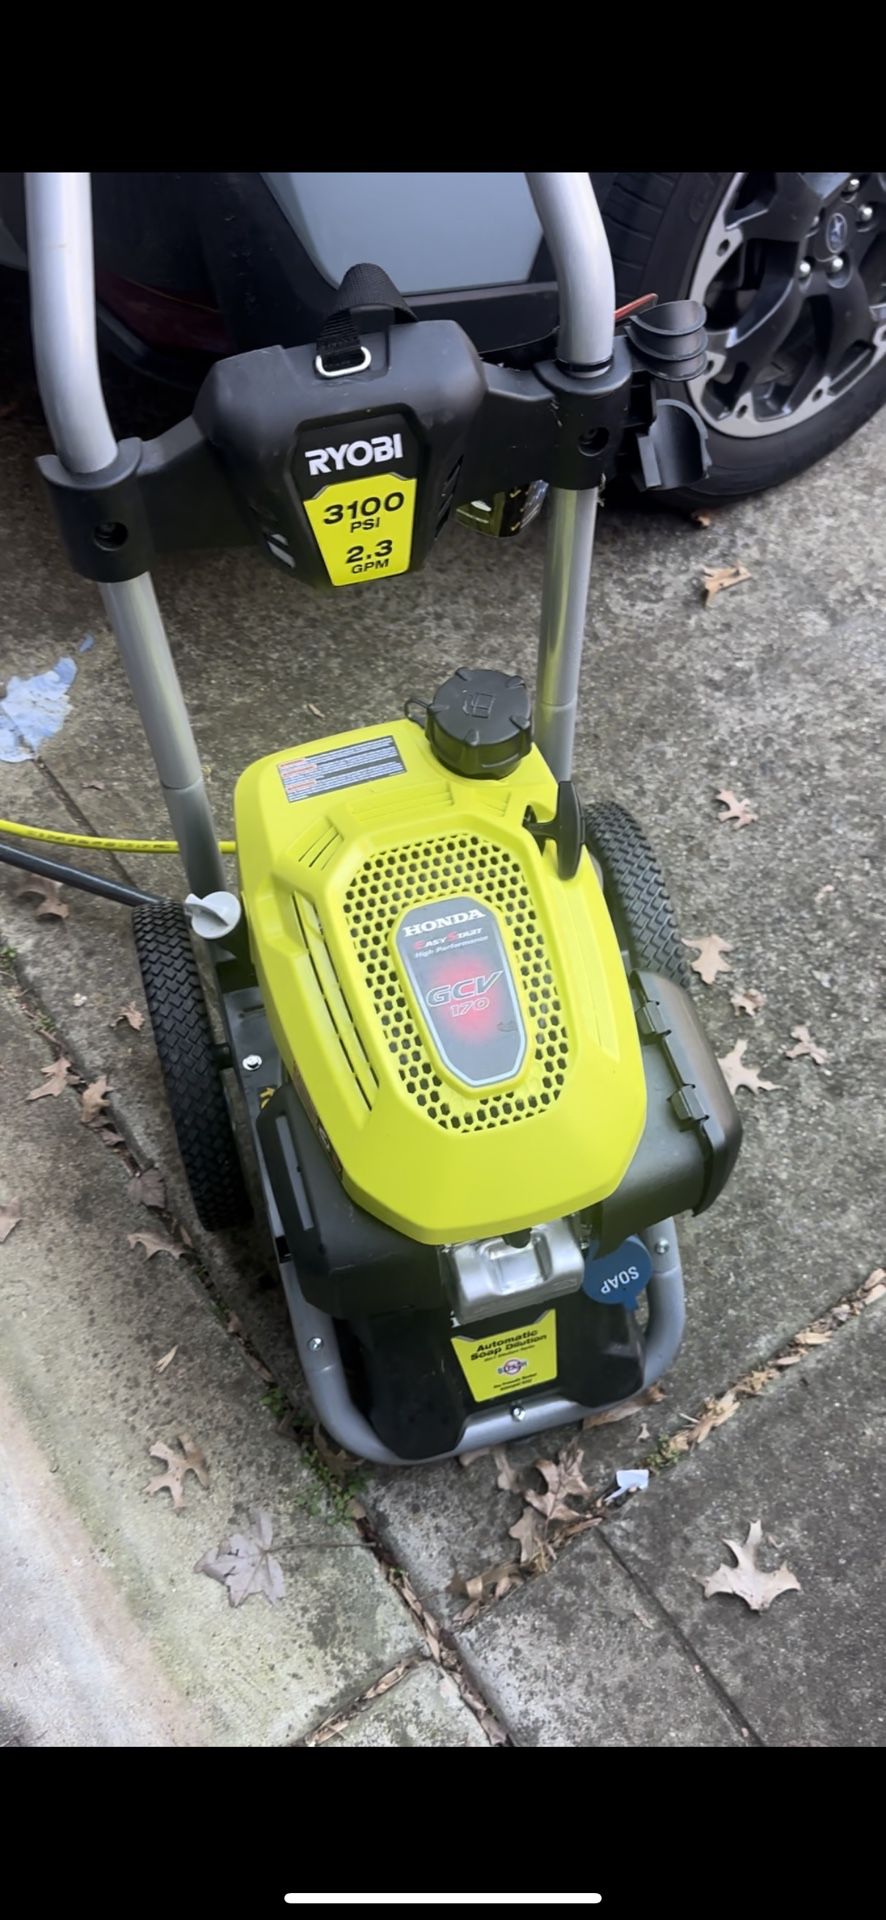 3100 PSI 2.3 GPM COLD WATER GAS PRESSURE WASHER 